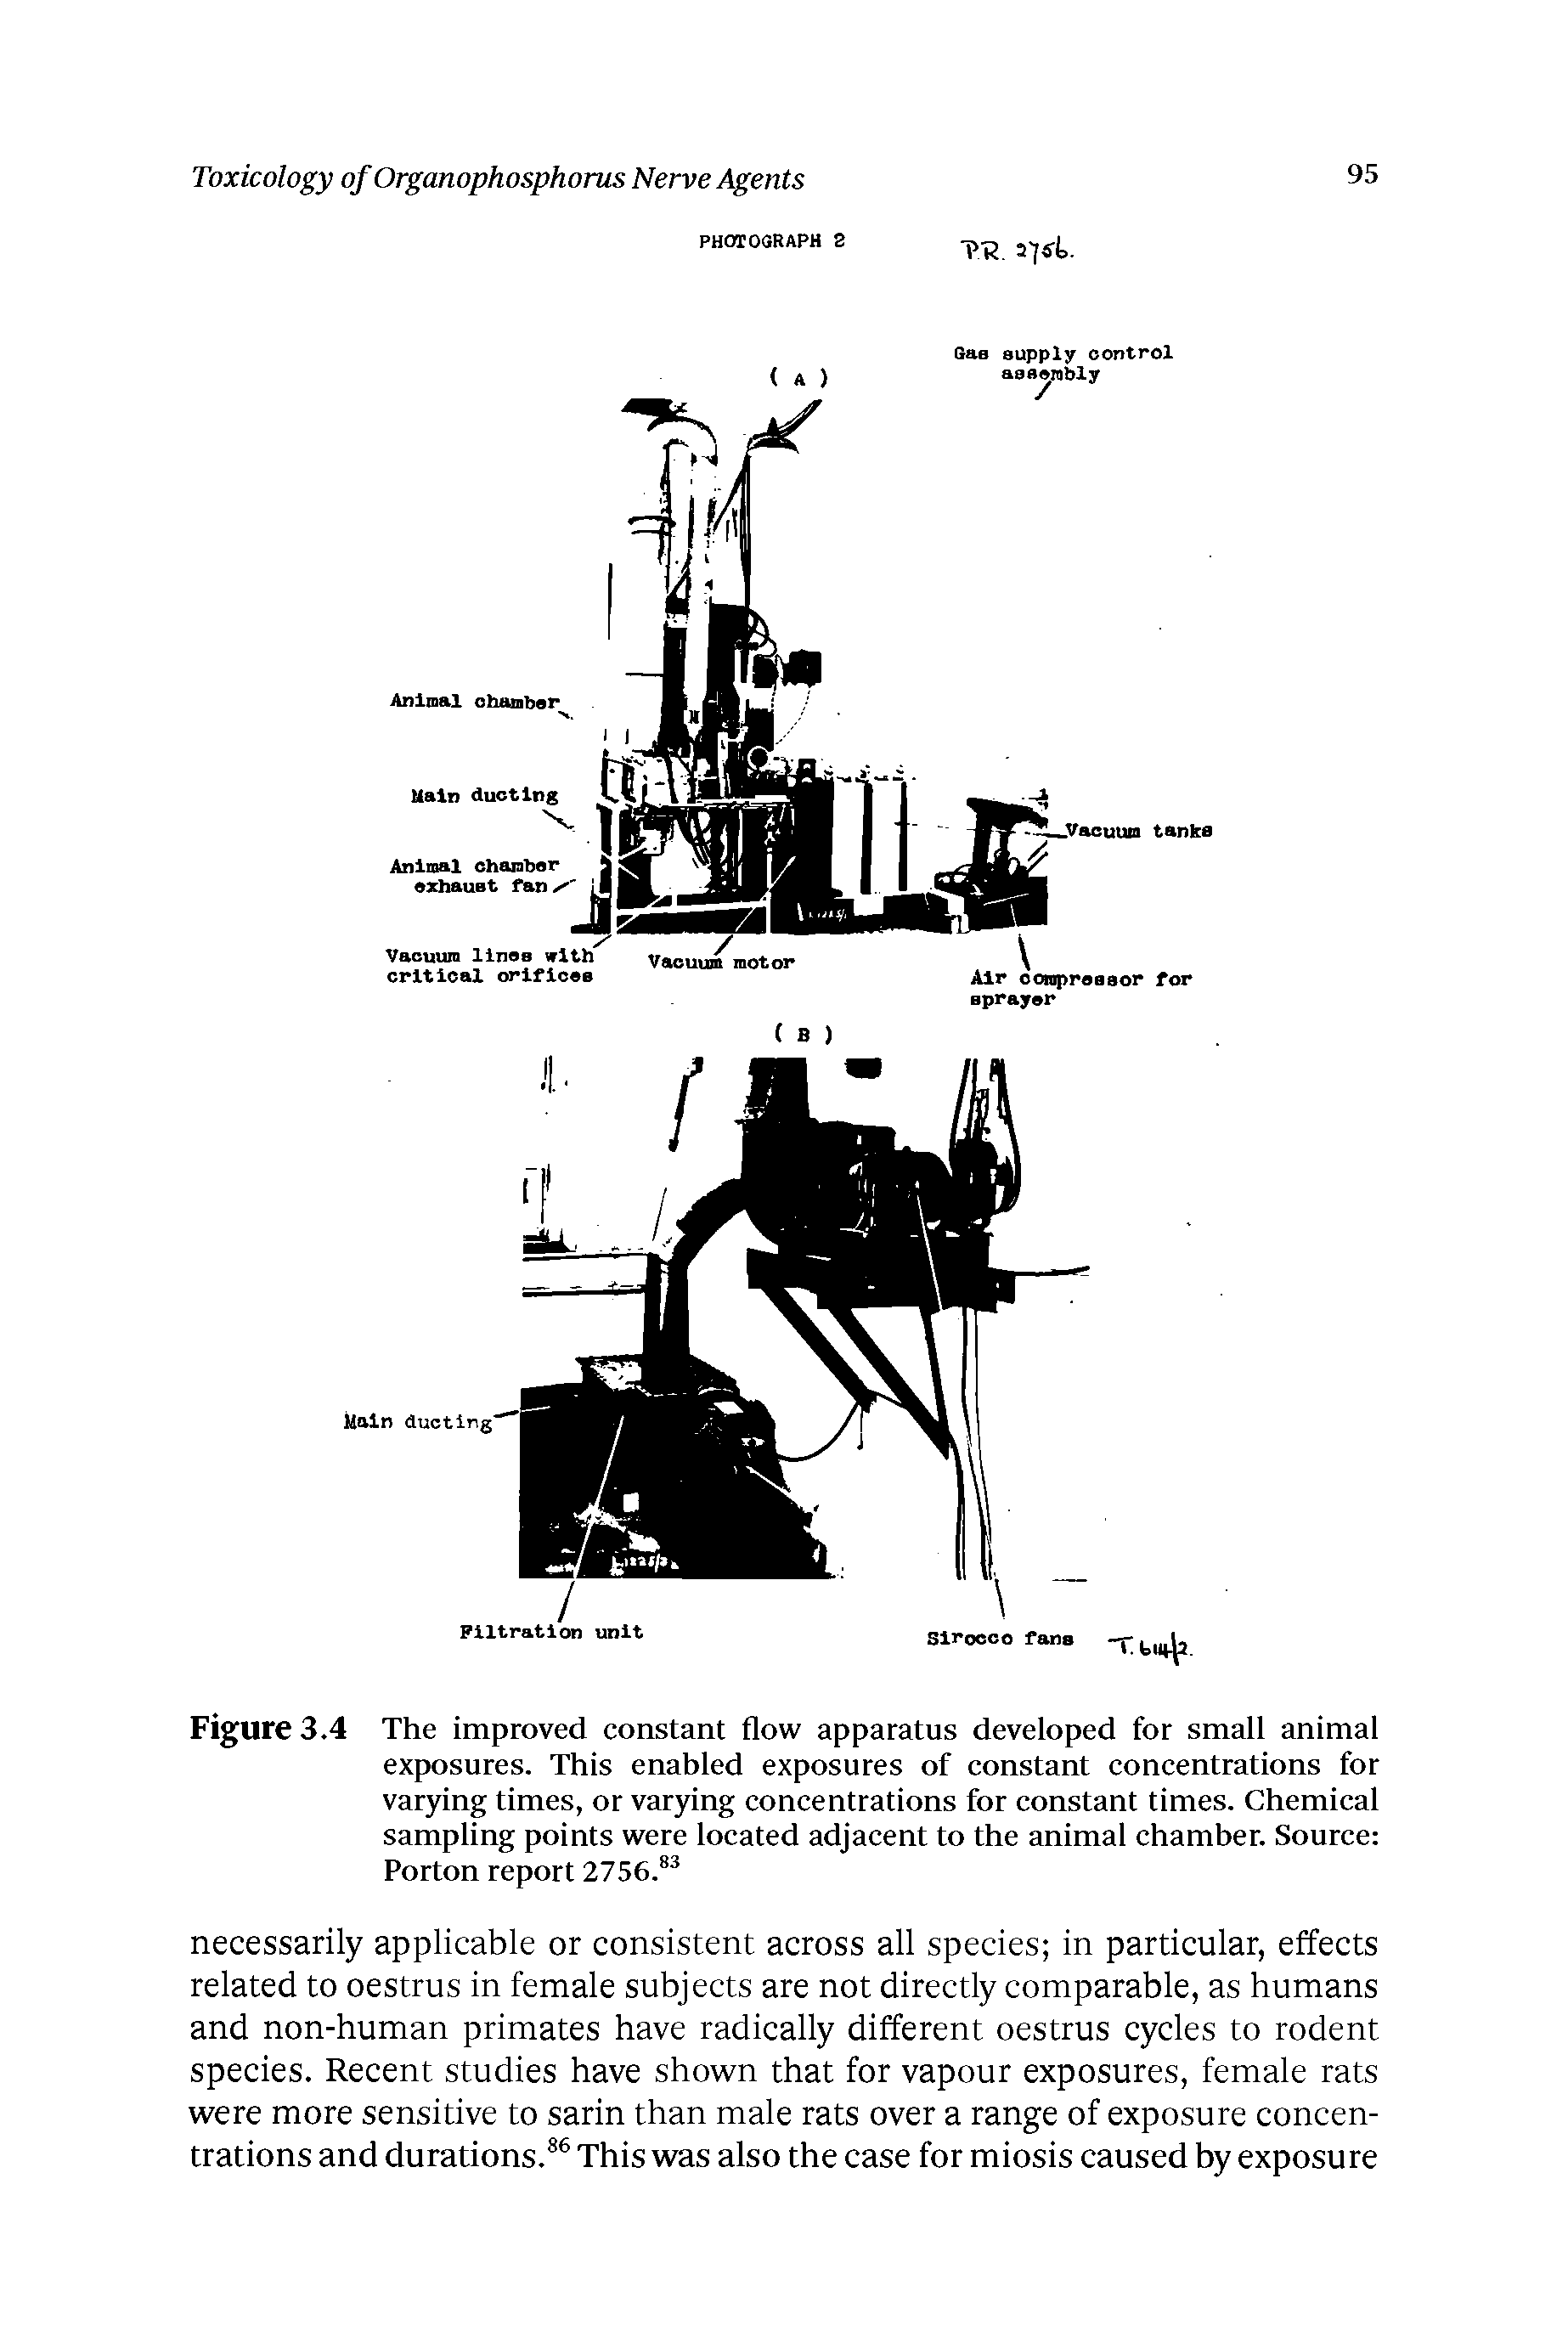 Figure 3.4 The improved constant flow apparatus developed for small animal exposures. This enabled exposures of constant concentrations for varying times, or varying concentrations for constant times. Chemical sampling points were located adjacent to the animal chamber. Source Porton report 2756. ...